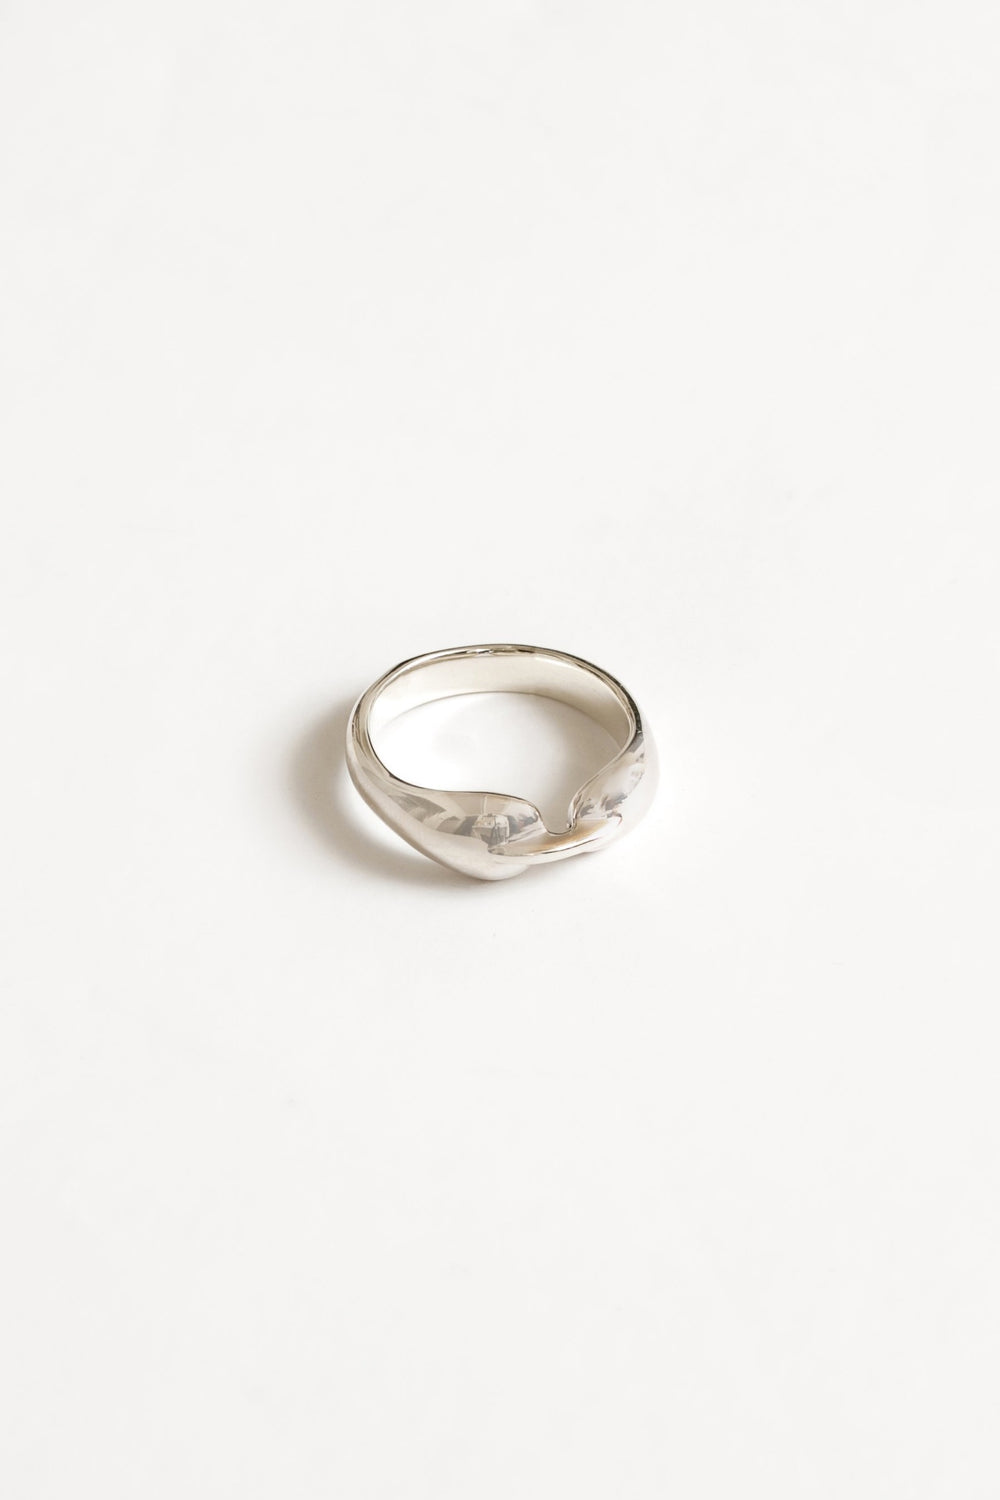 Silver Equine Ring